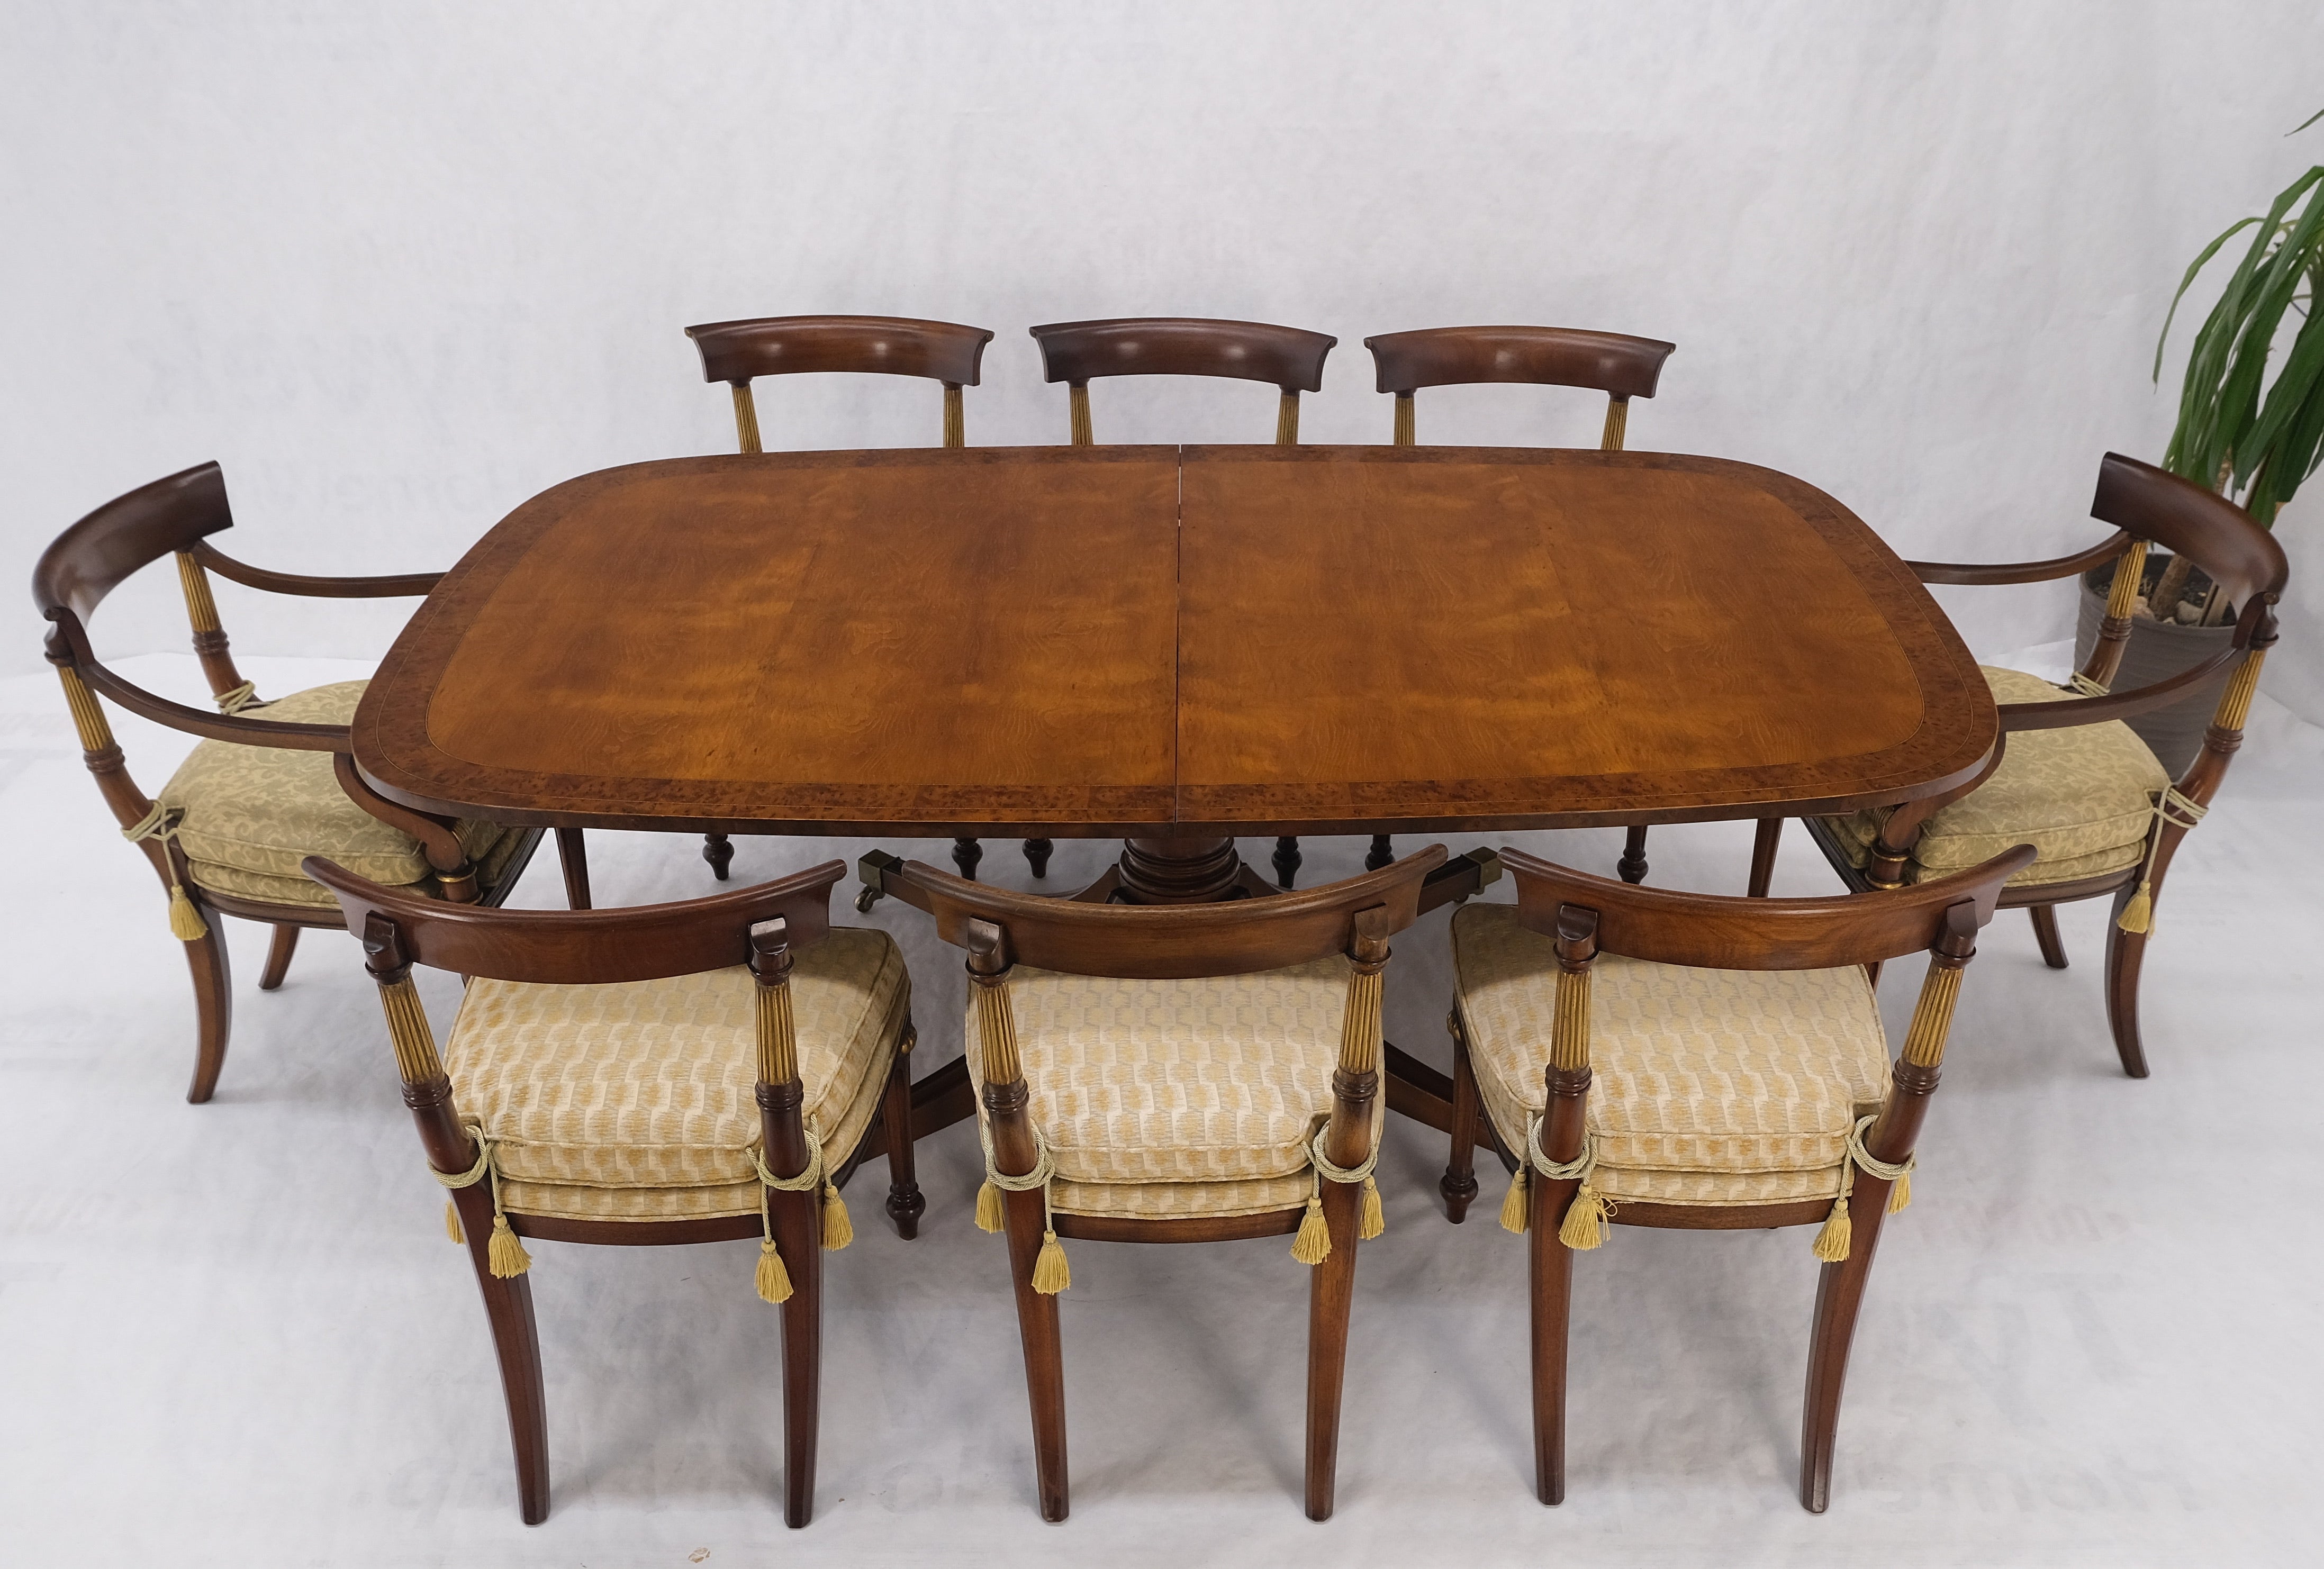 Single Pedestal One Leaf Oval Banded Dining Table 8 Regency Chairs Set MINT! In Good Condition For Sale In Rockaway, NJ